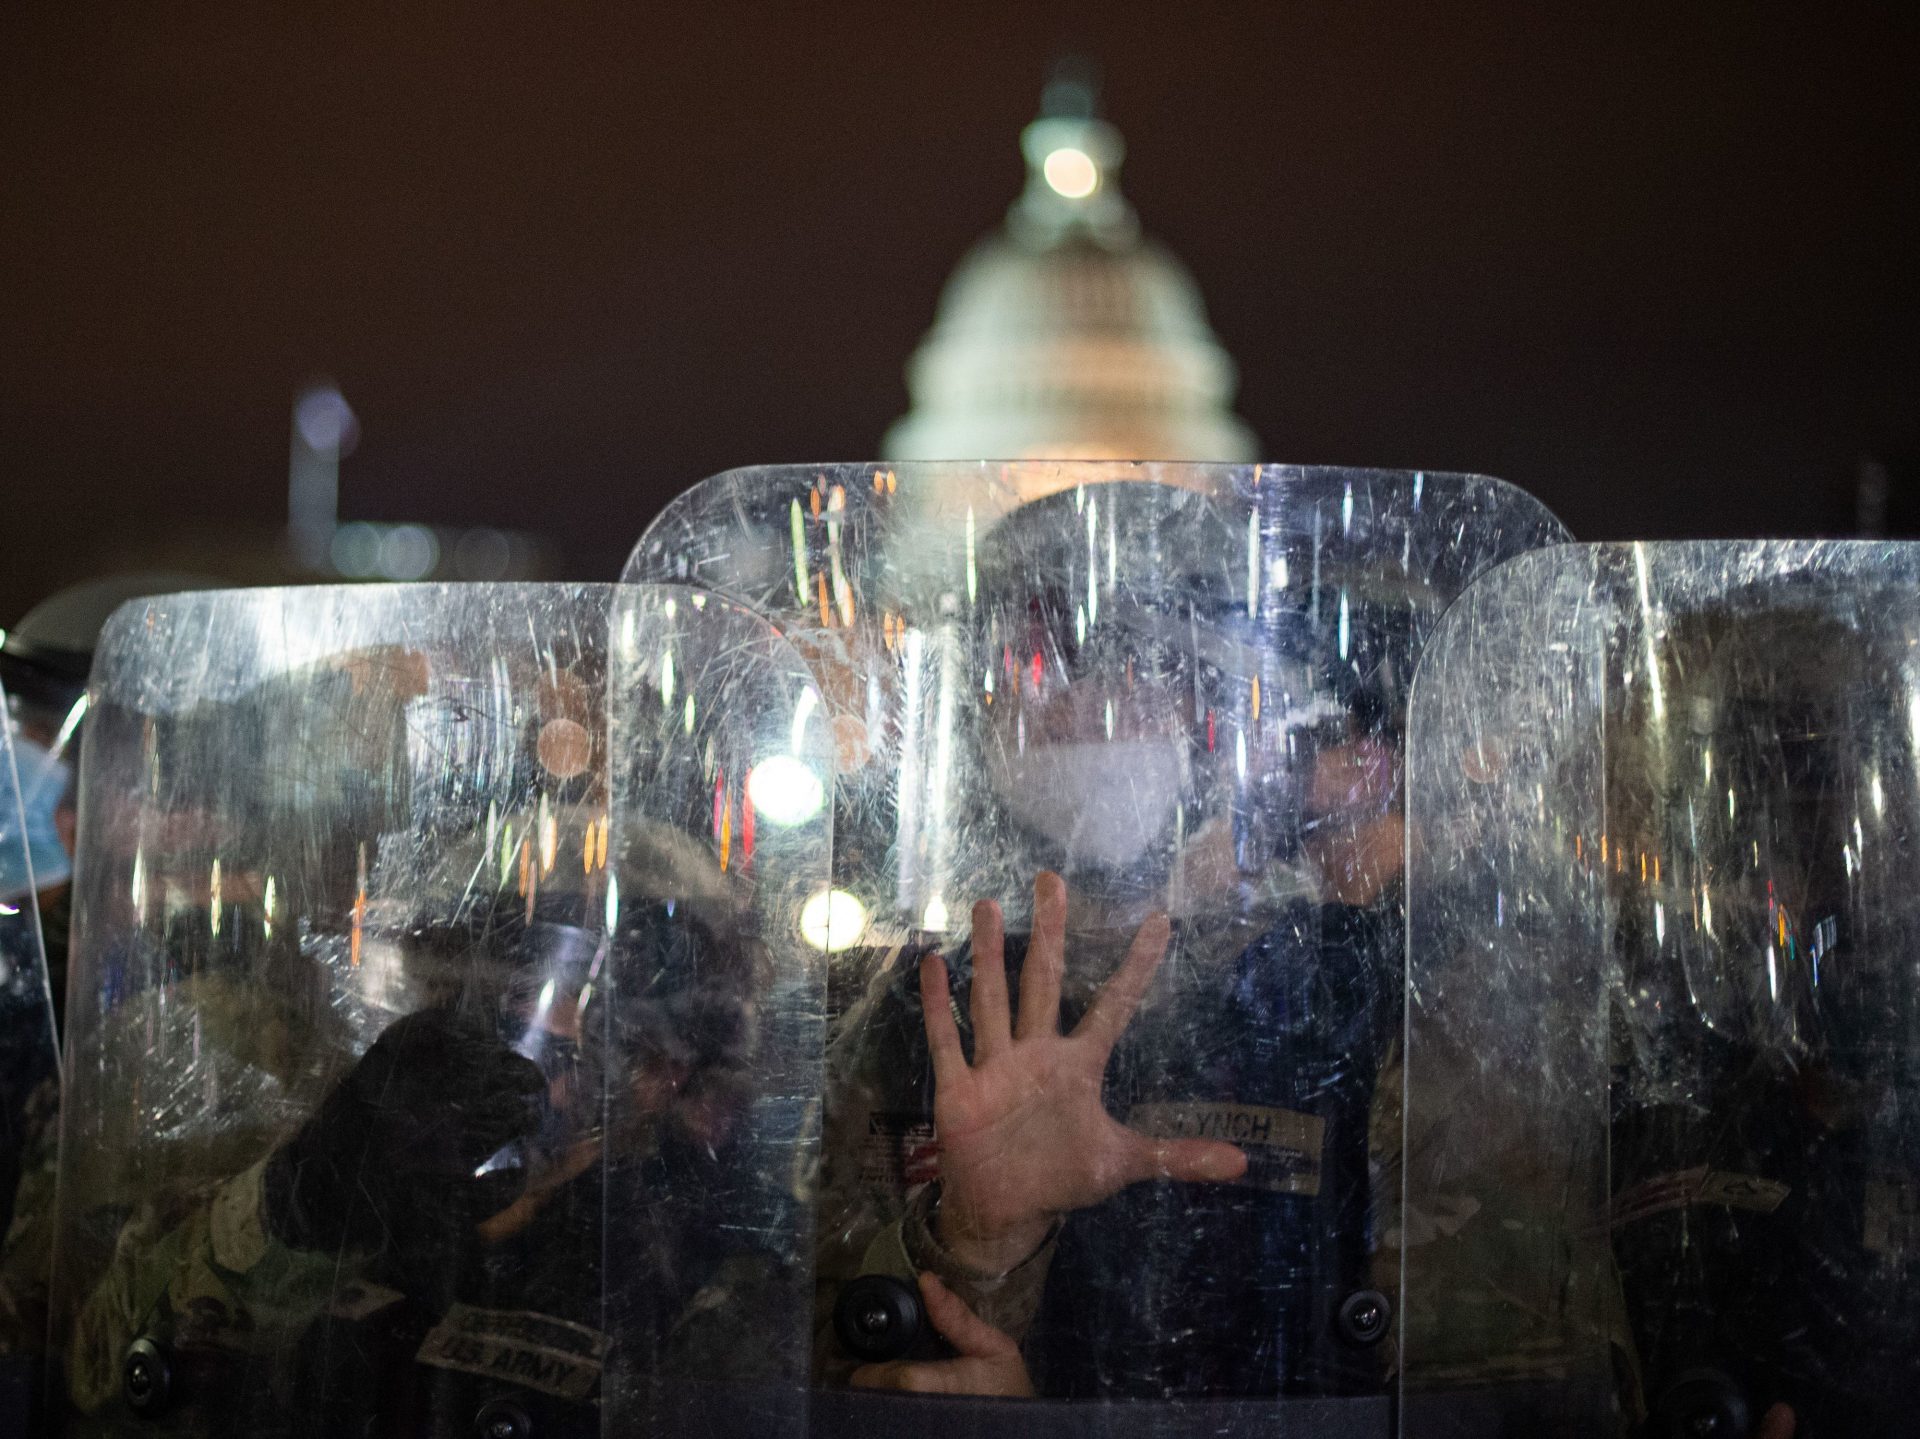 National Guard troops are seen behind shields as they clear a street from protestors outside the Capitol building on January 6, 2021 in Washington, DC.